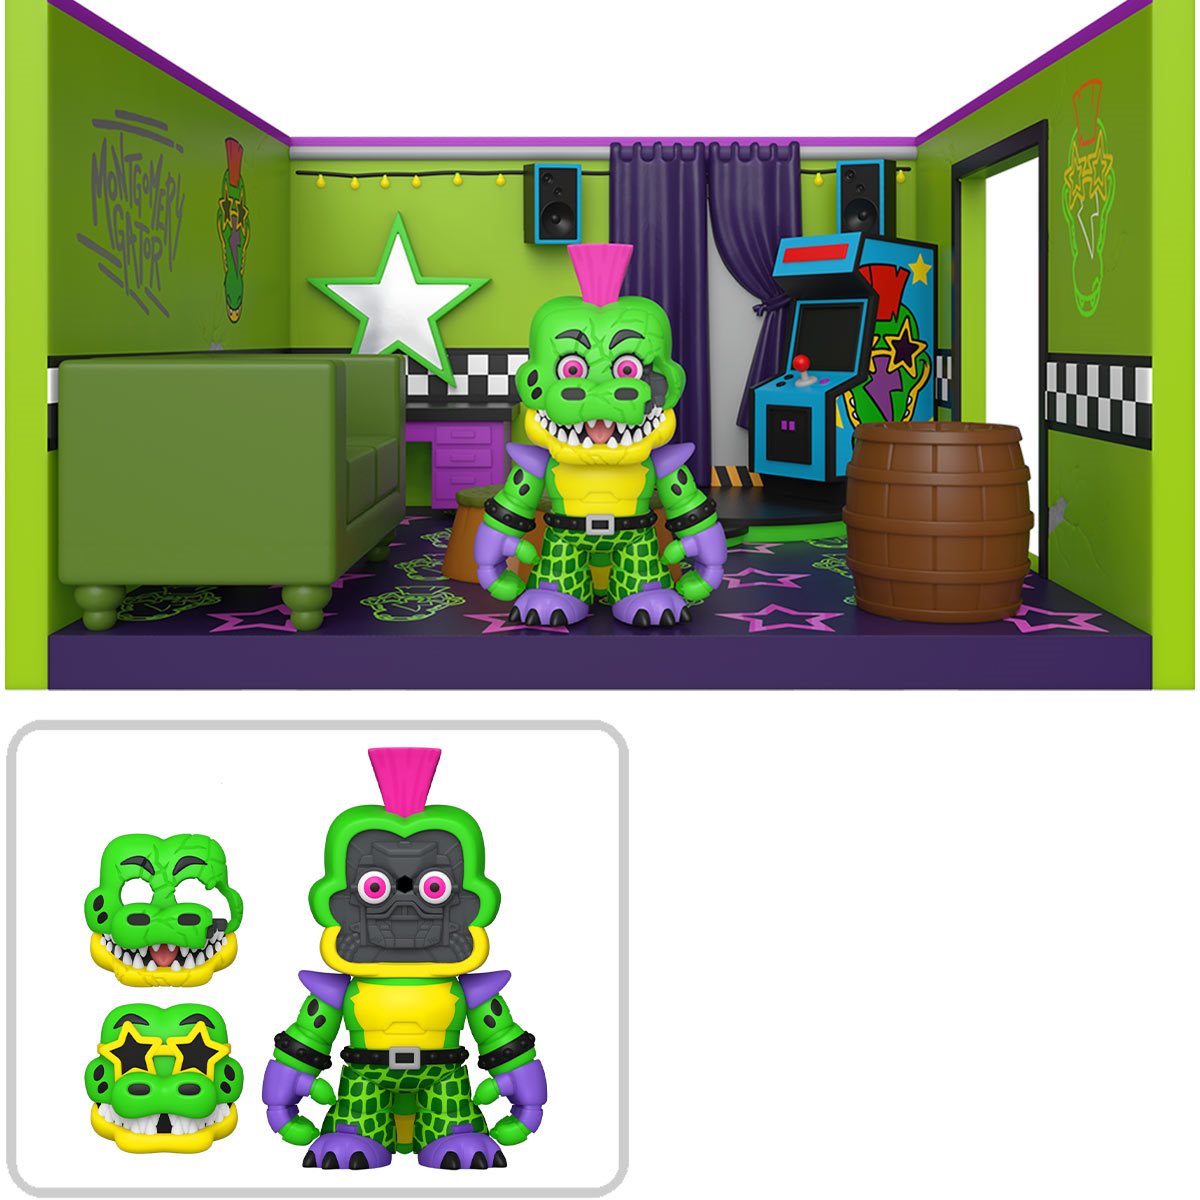 Five Nights at Freddy's Funko SNAPS! Storage Room with Chica Playset